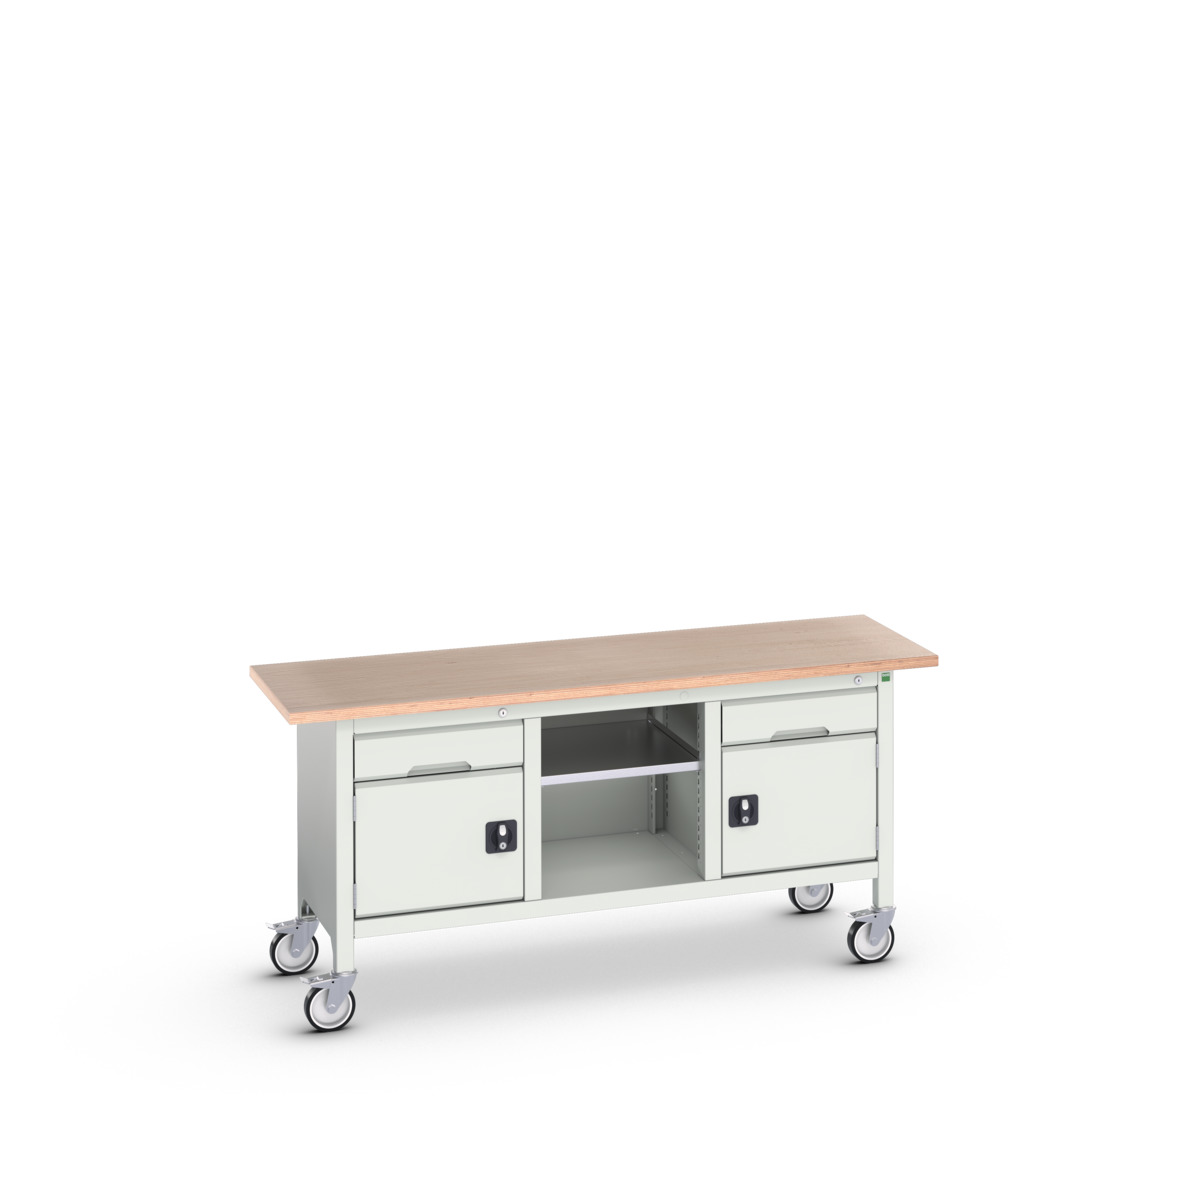 16923221.16 - verso mobile storage bench (mpx)